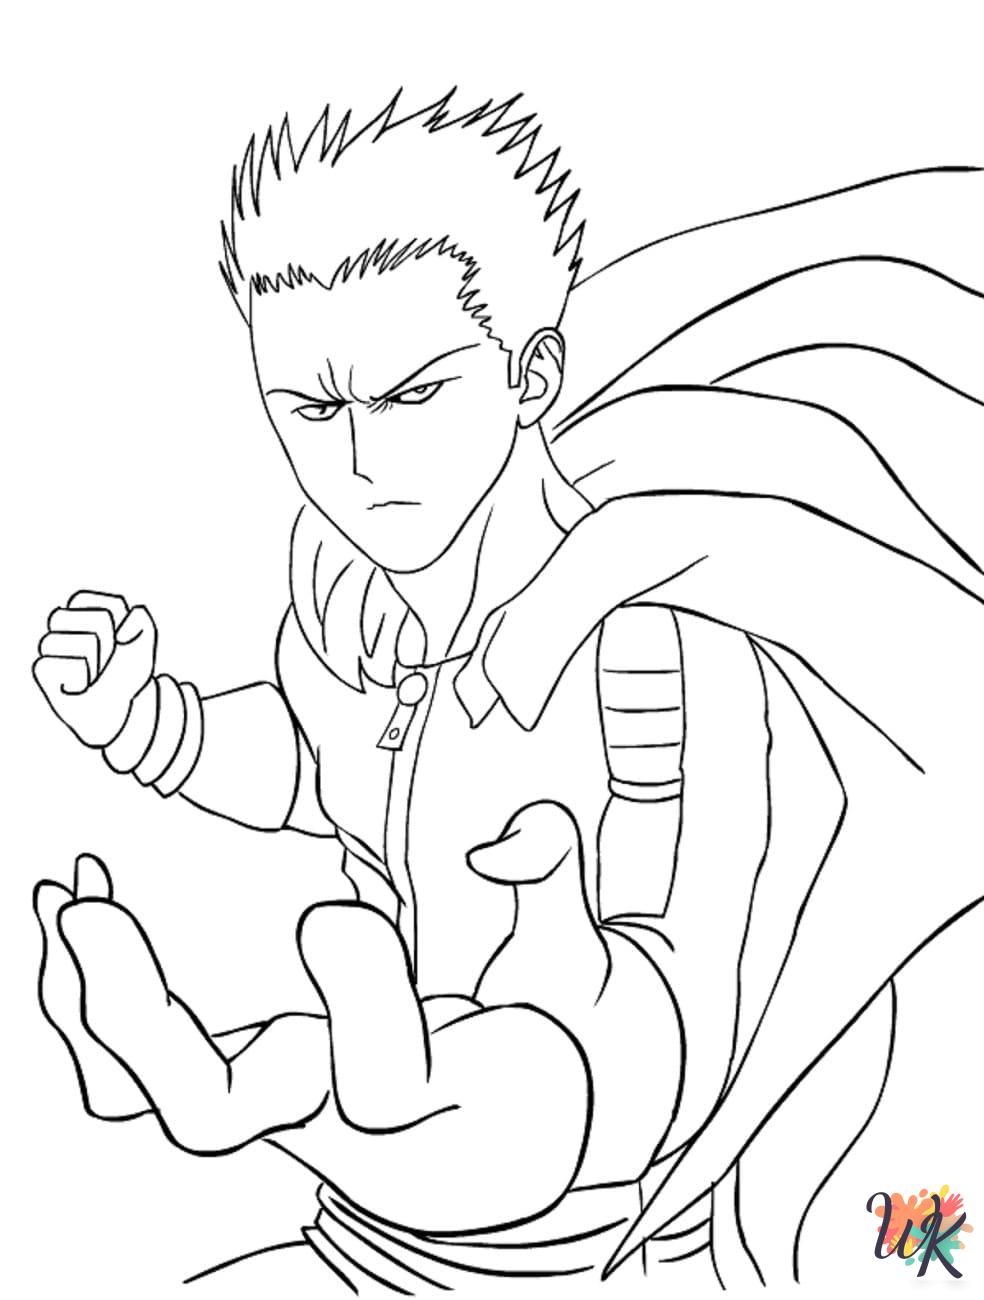 cute One-Punch Man coloring pages